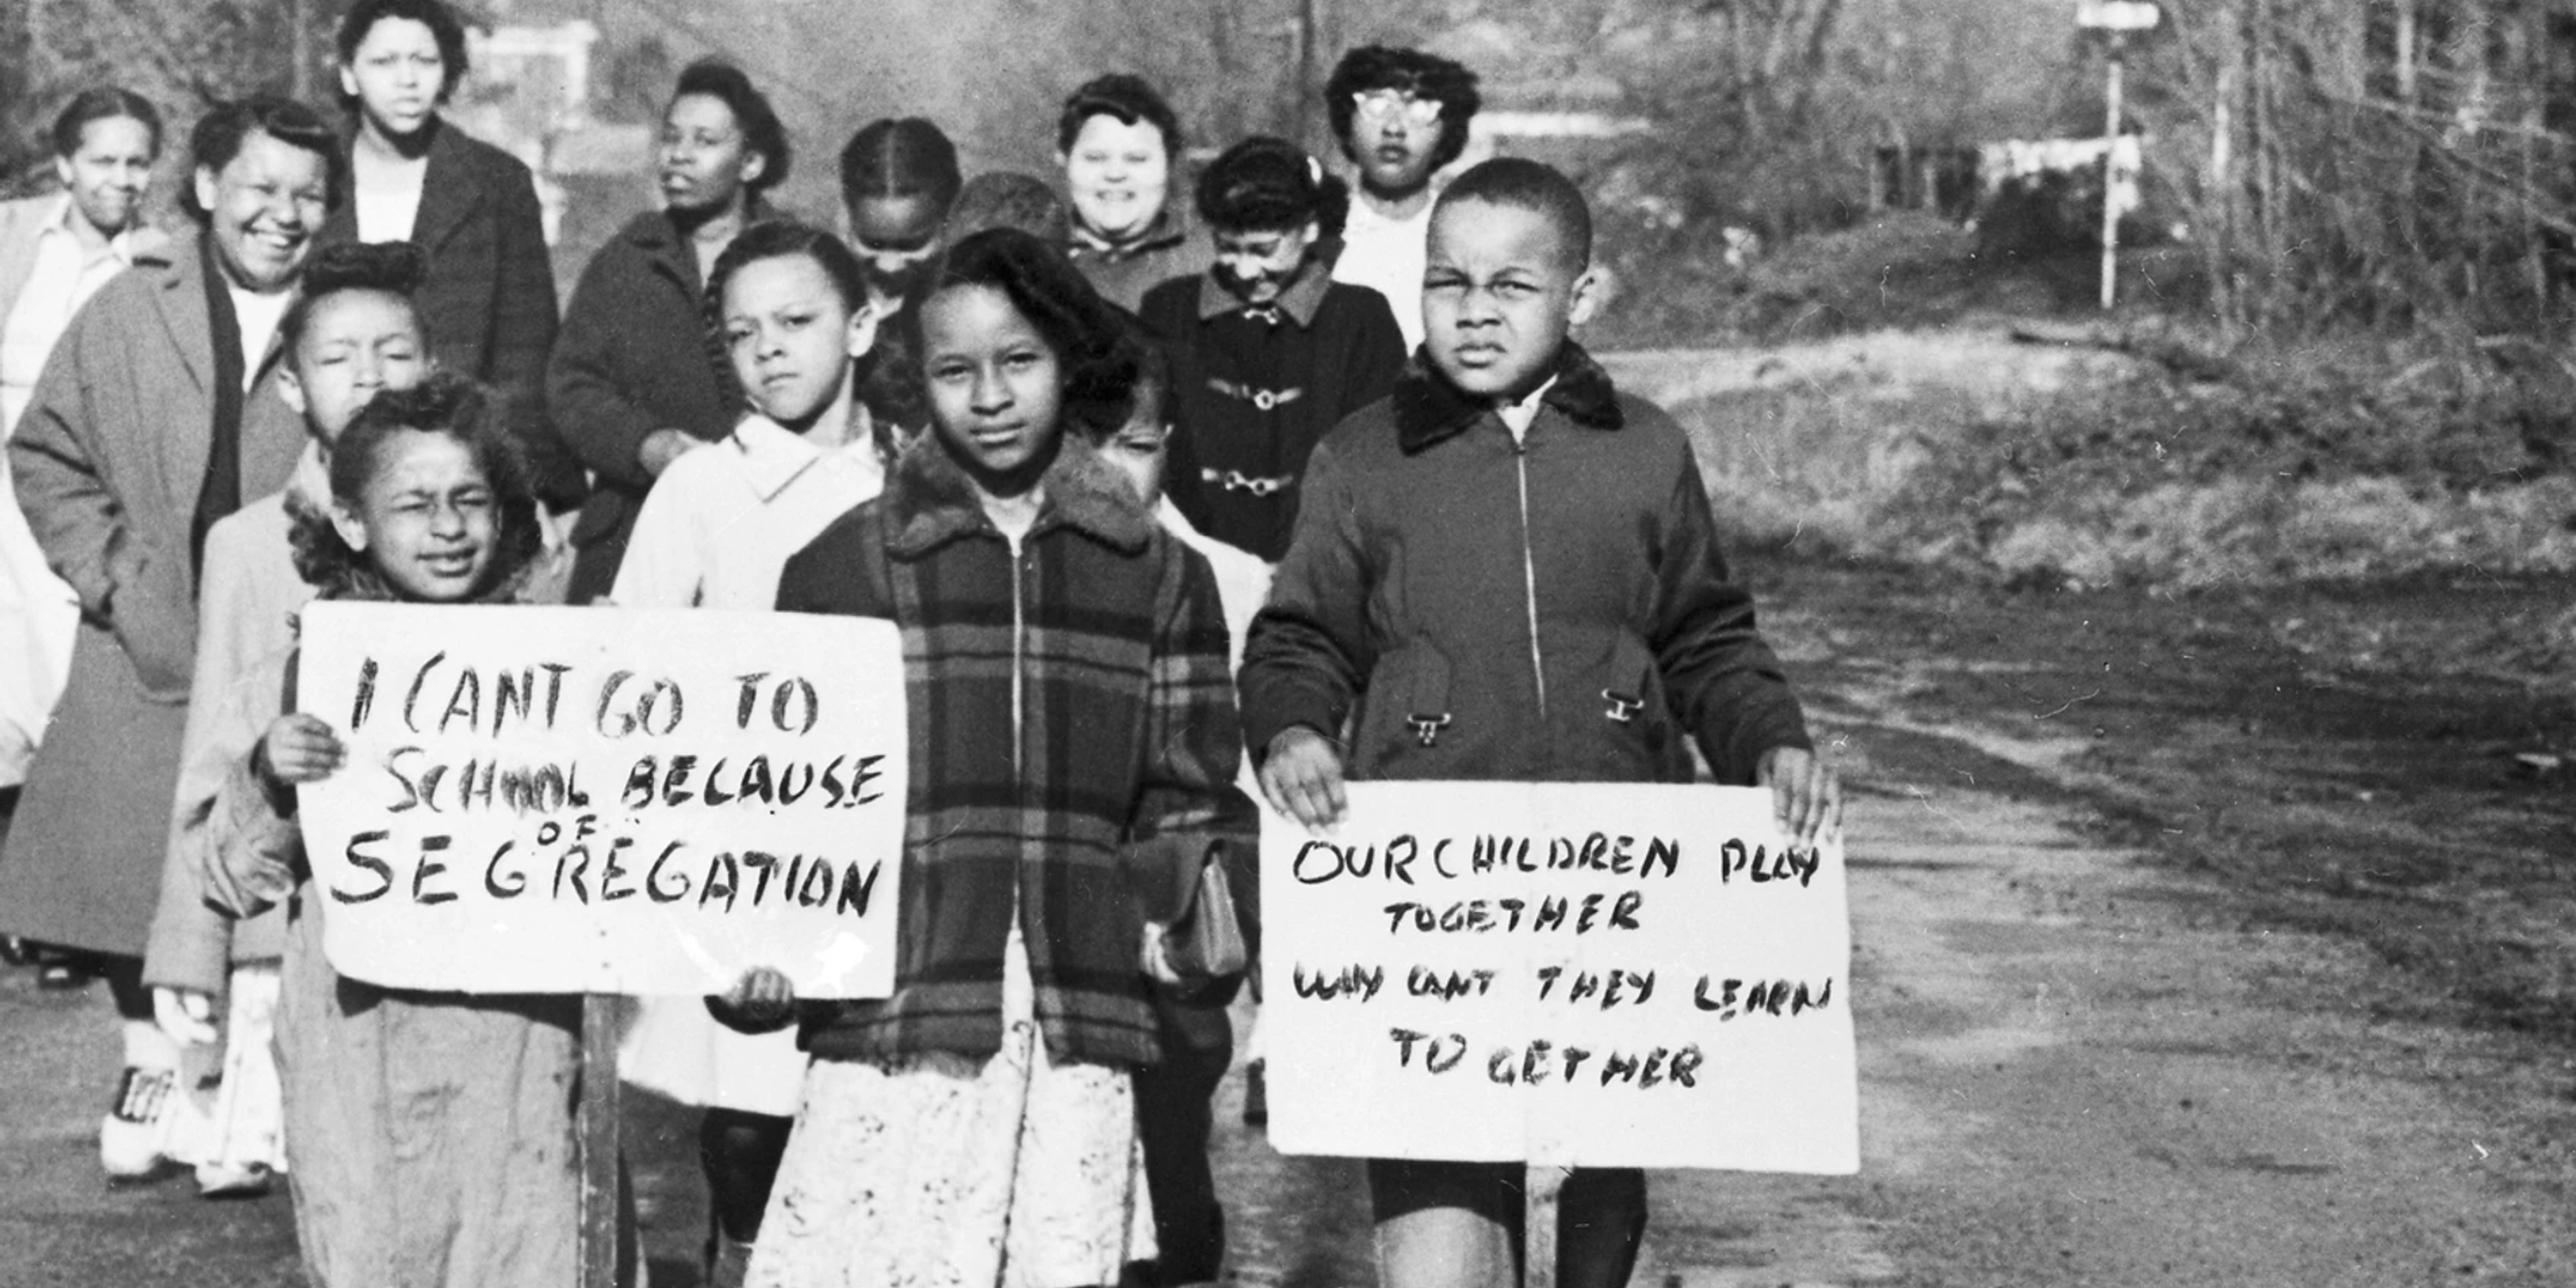 Mothers and children marching for school desegregation - Photo by Bettmann Collection/Getty Images